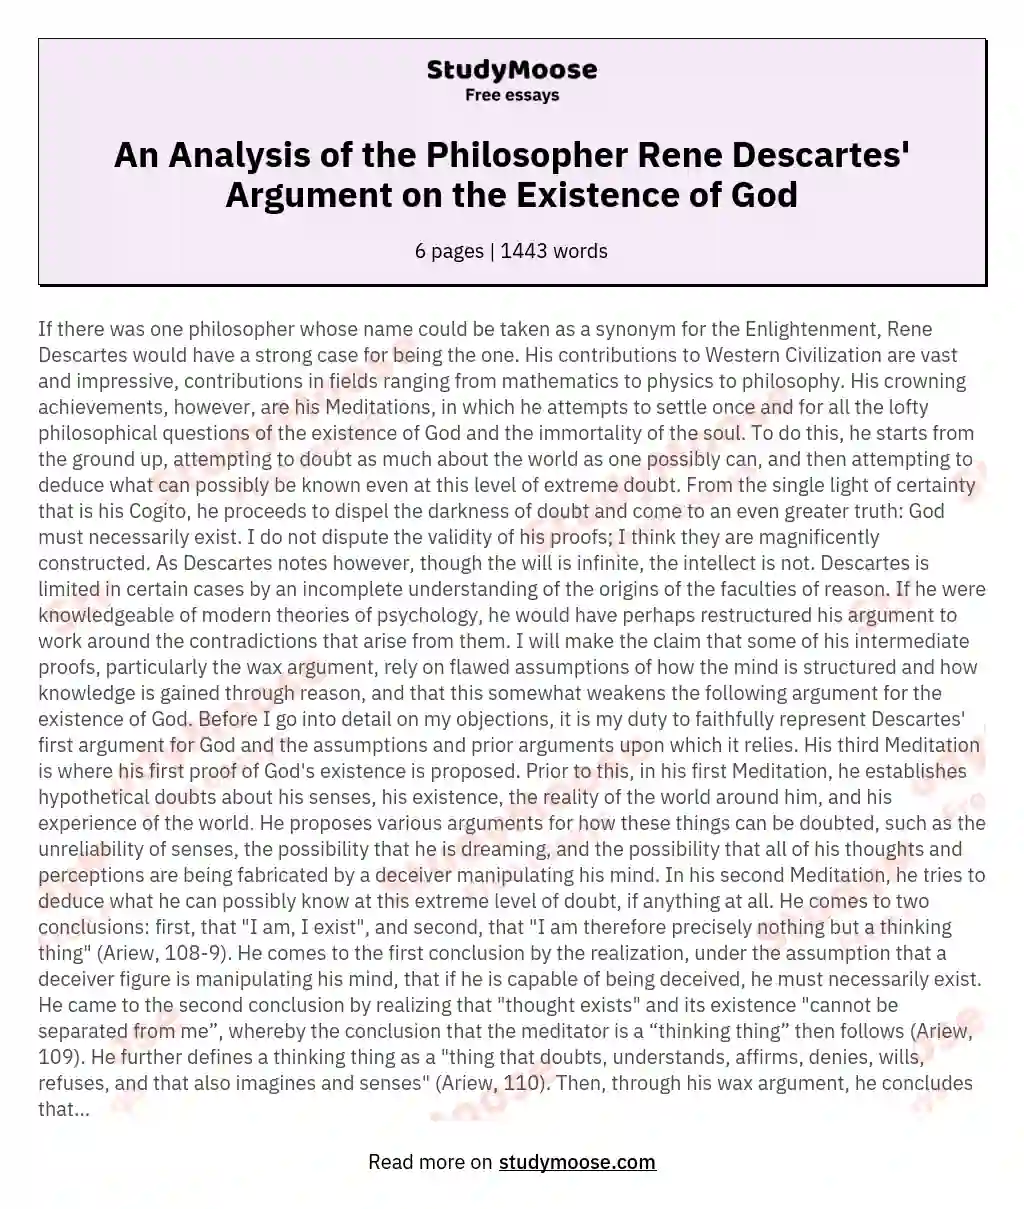 An Analysis of the Philosopher Rene Descartes' Argument on the Existence of God essay